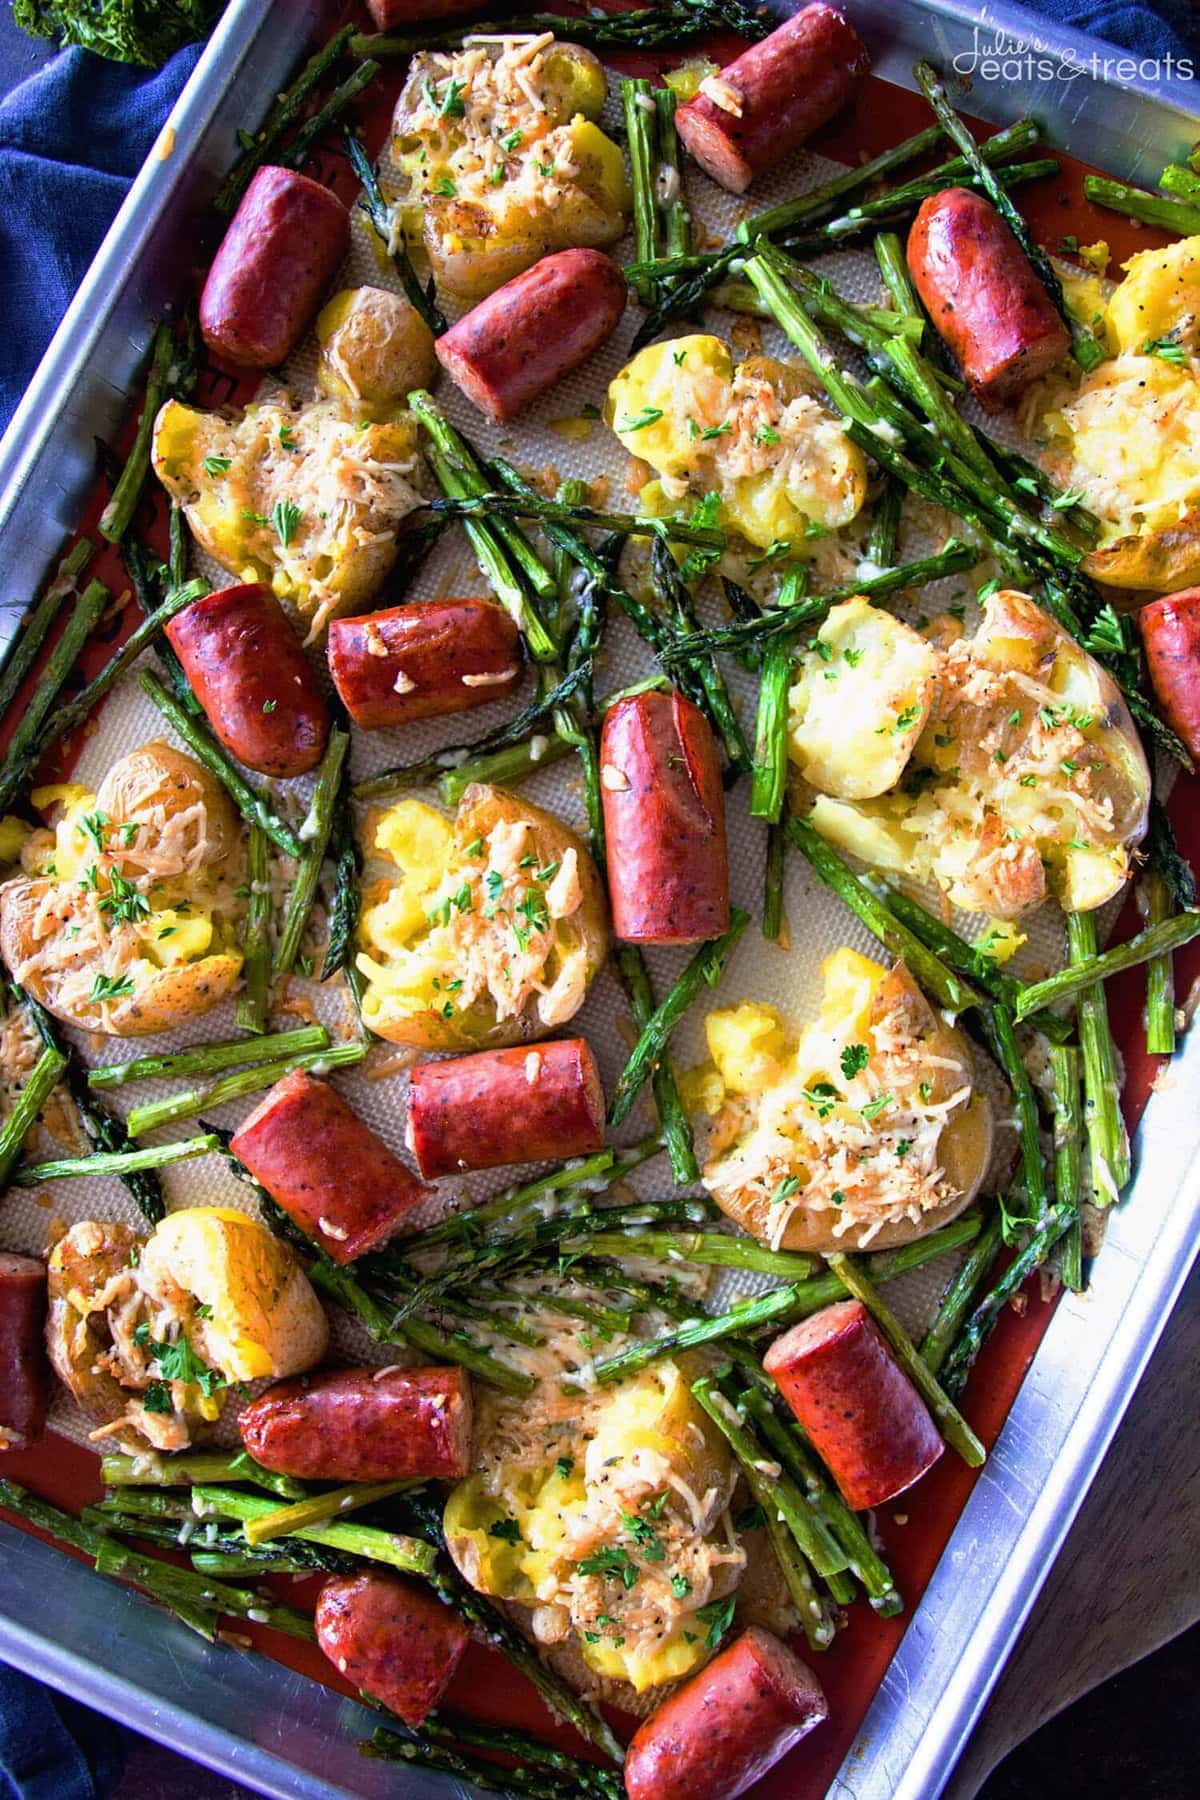 One Pan Sausage & Veggies ~ Easy, One Pan Dinner Perfect for Weeknight Meals! Delicious Smashed Potatoes, Sausage and Asparagus!